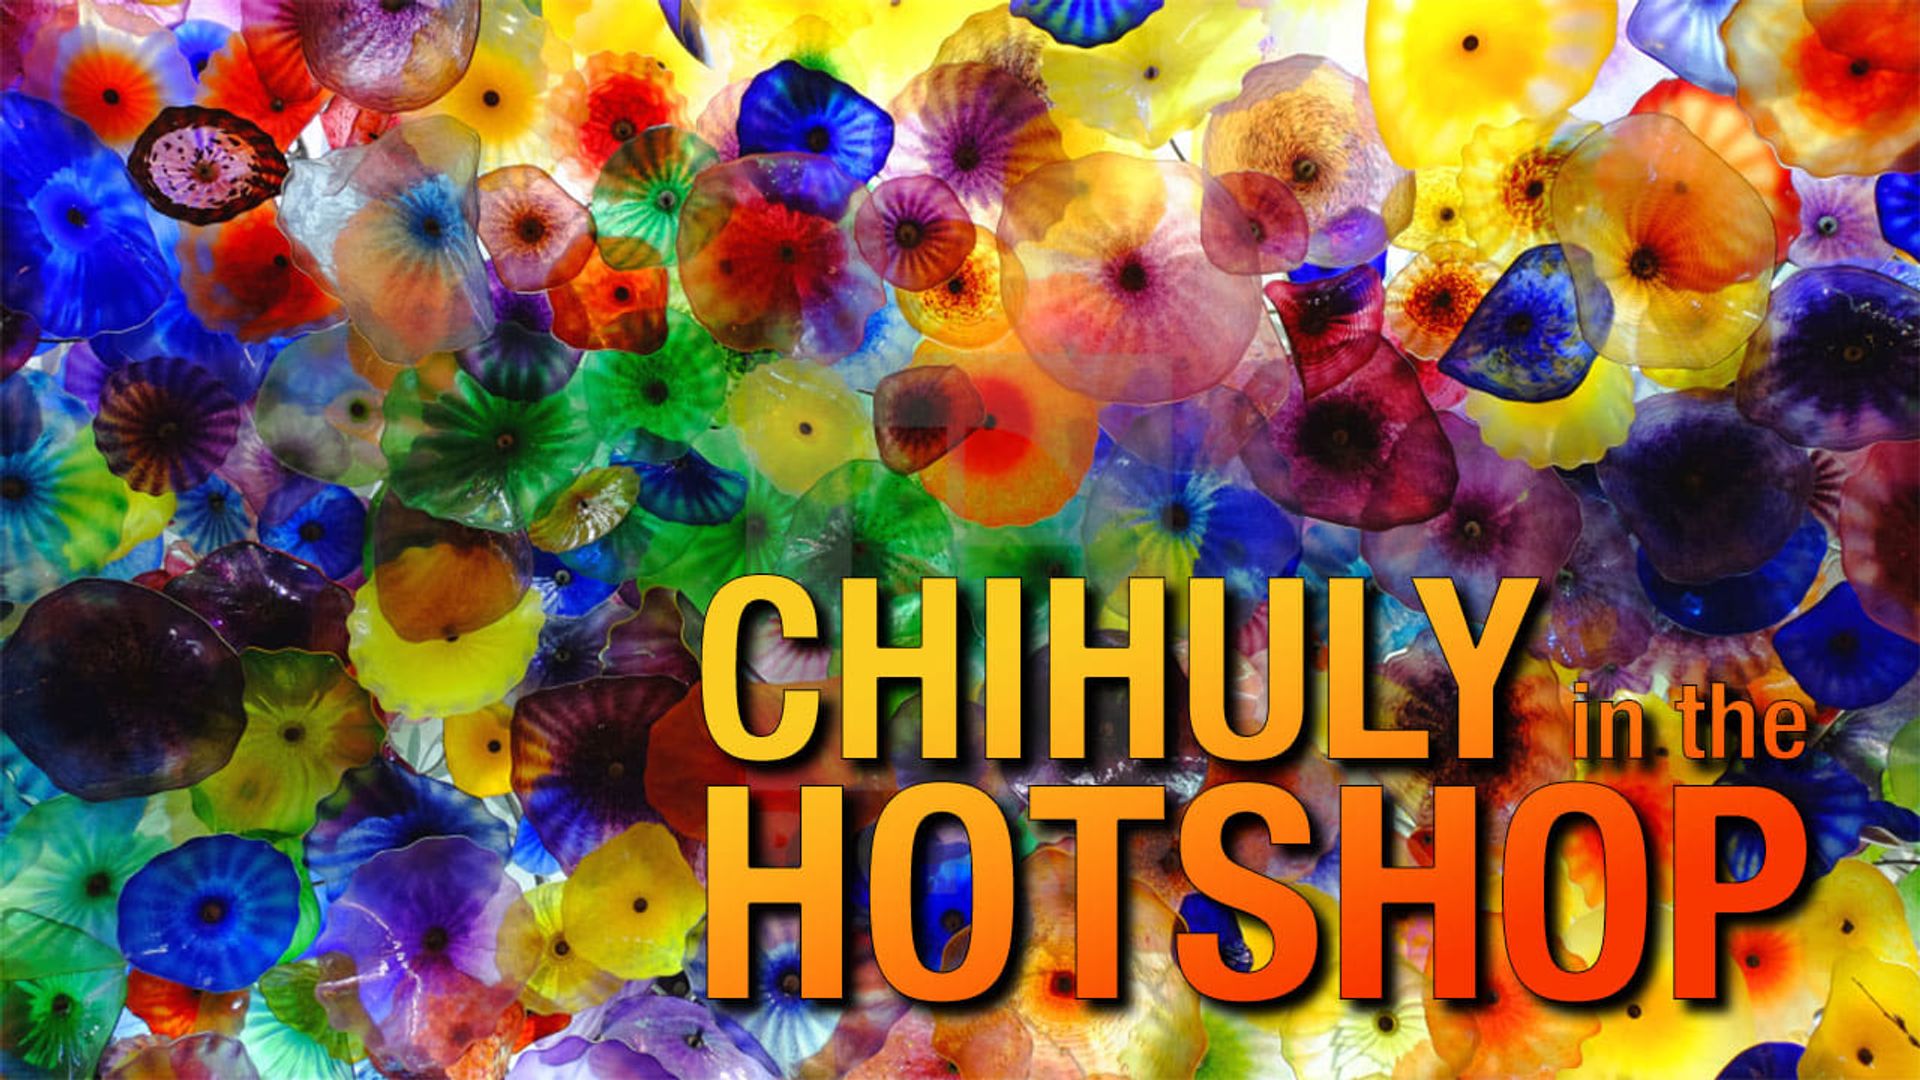 Chihuly in the Hotshop background